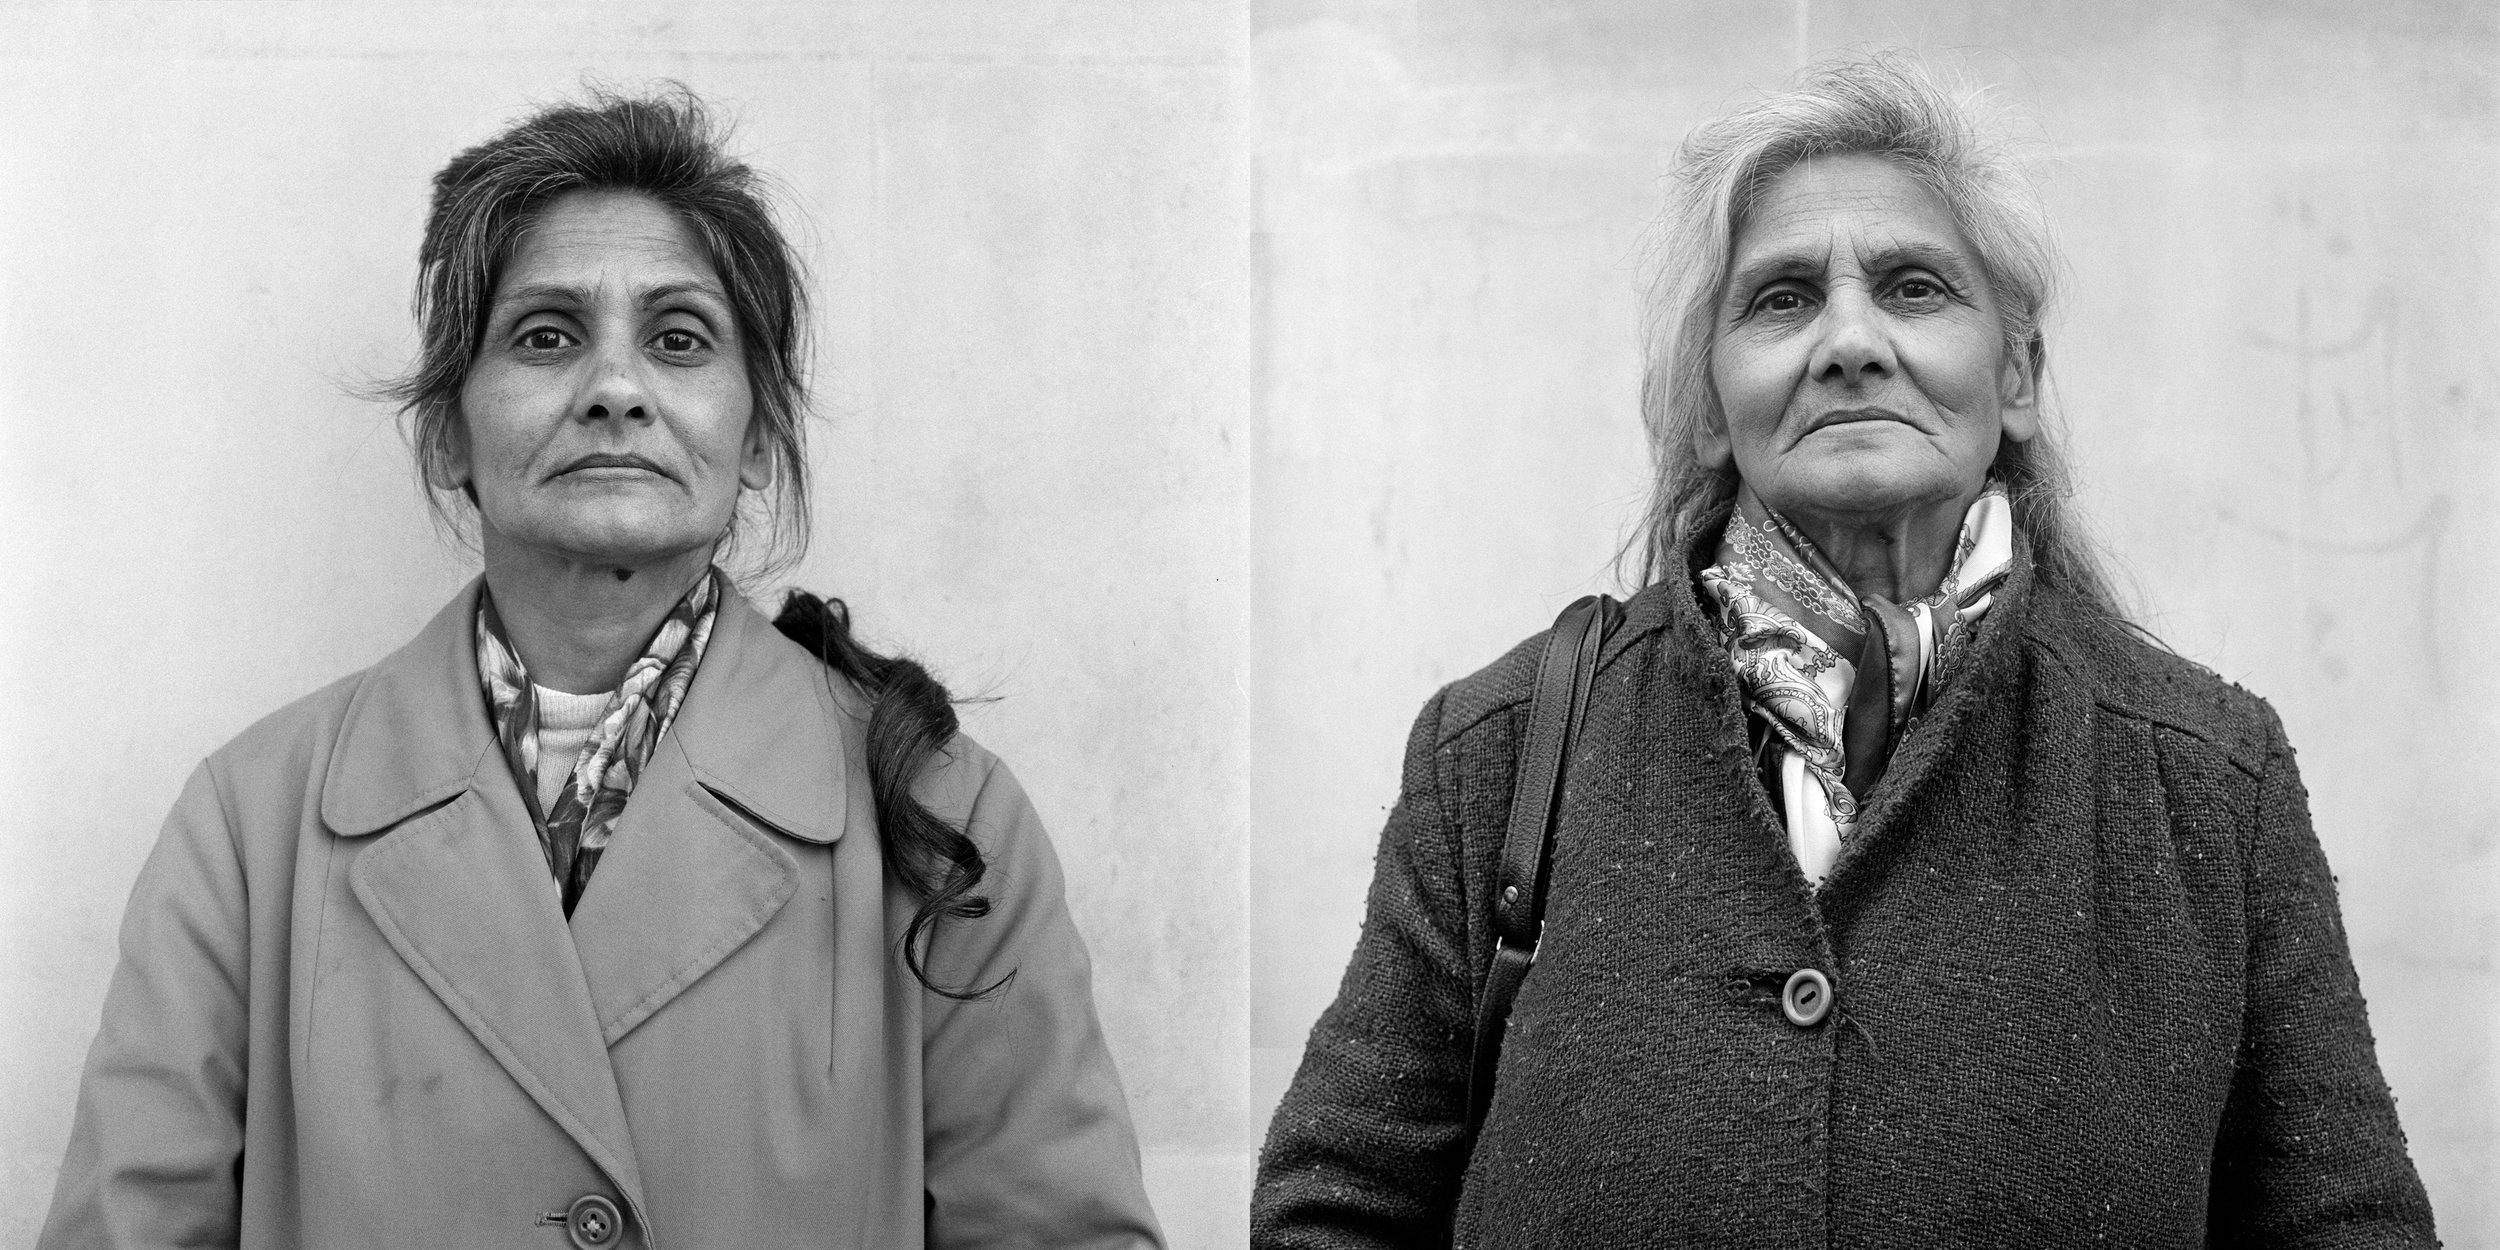  Now and Then portrait from the Free Photographic Omnibus, Florence Alma Snoad, Southampton. 1974 and 1999 ©Daniel Meadows 